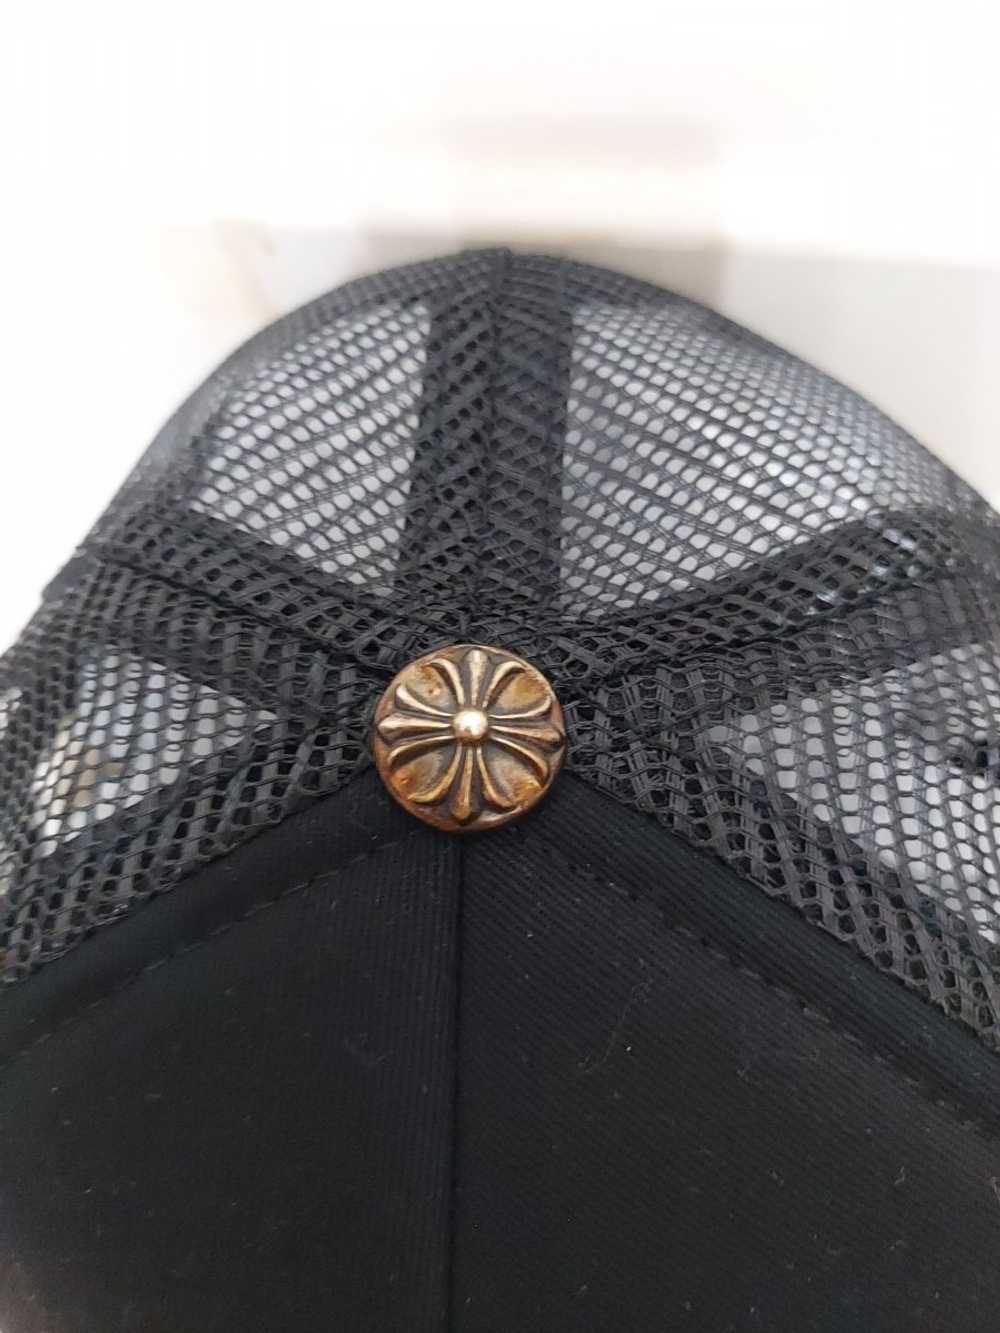 Chrome Hearts Black Hollywood USA CH Trucker Hat - image 2